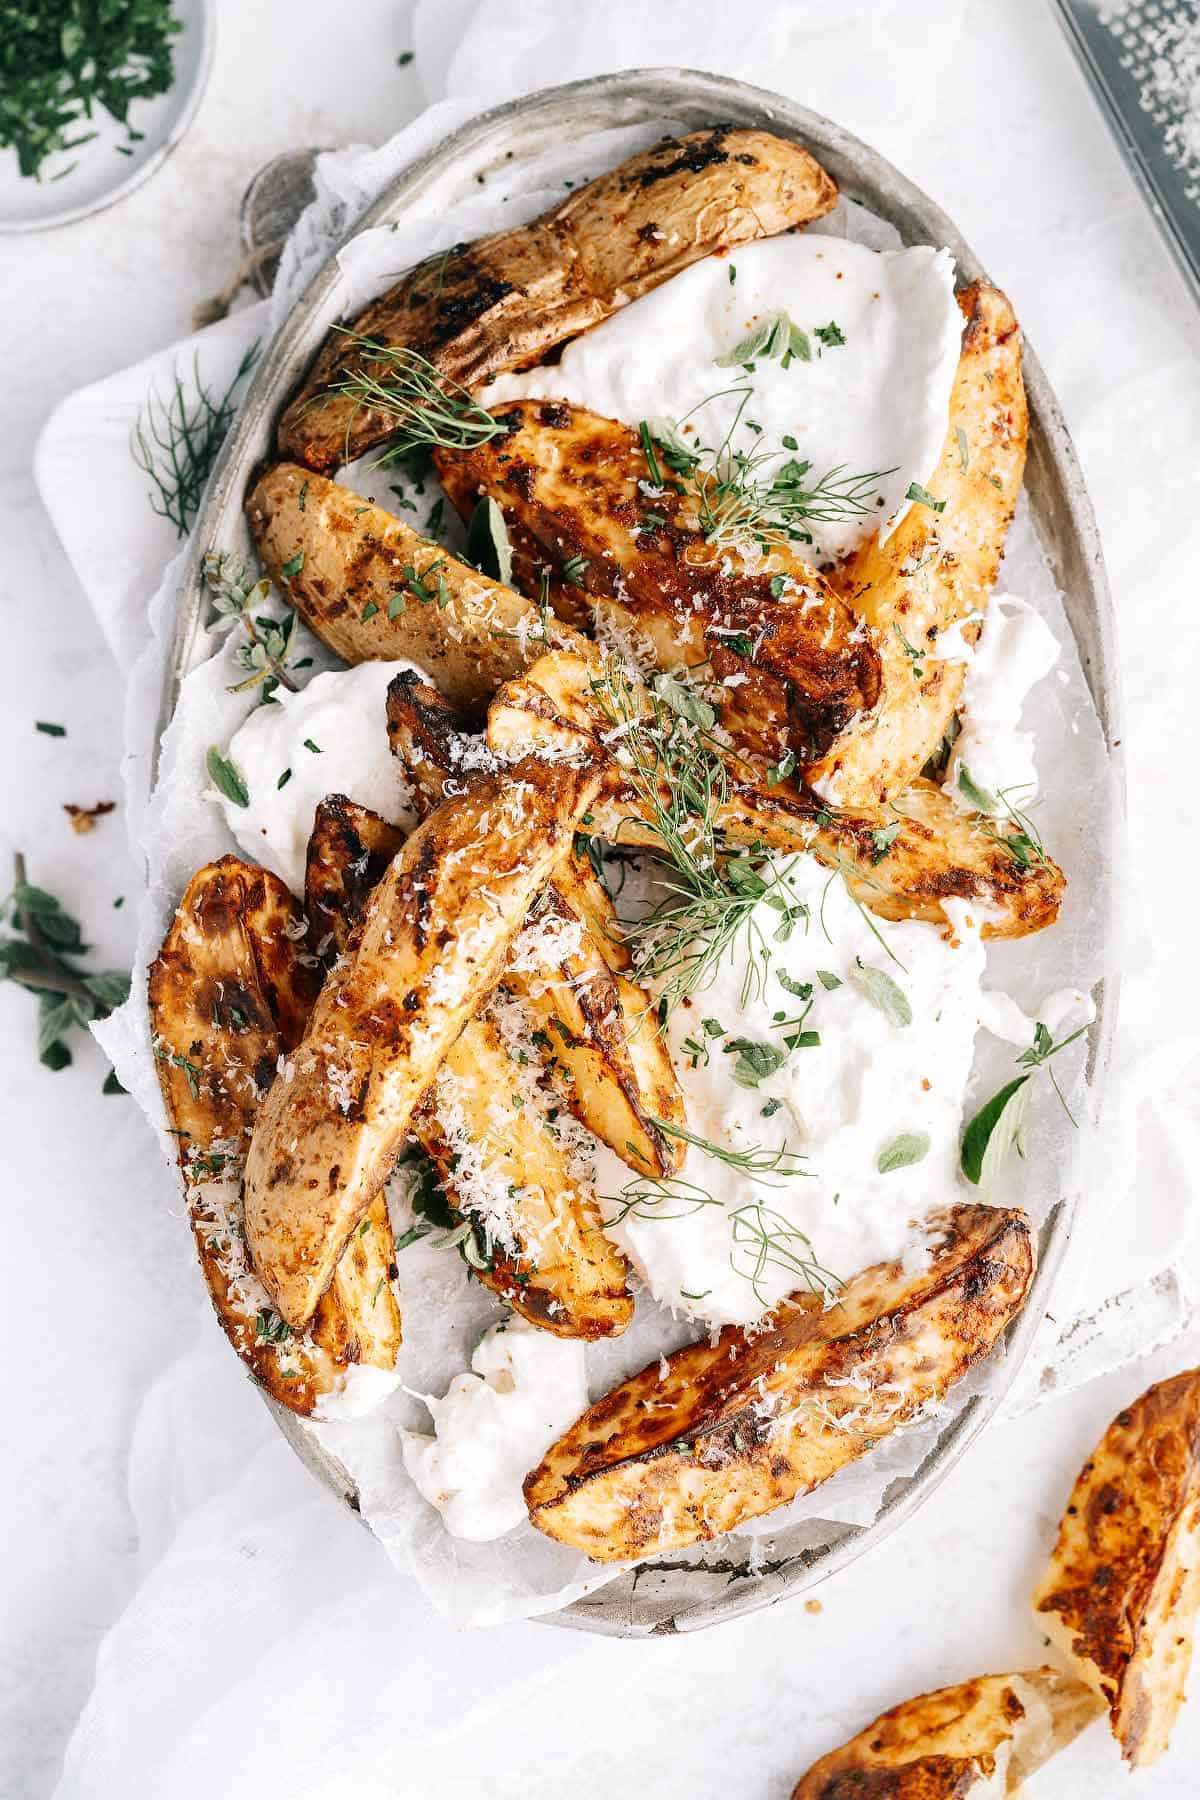 Air fryer potato wedges on a plate, served with burrata cheese, garnished with fresh herbs and sprinkled with parmesan cheese.